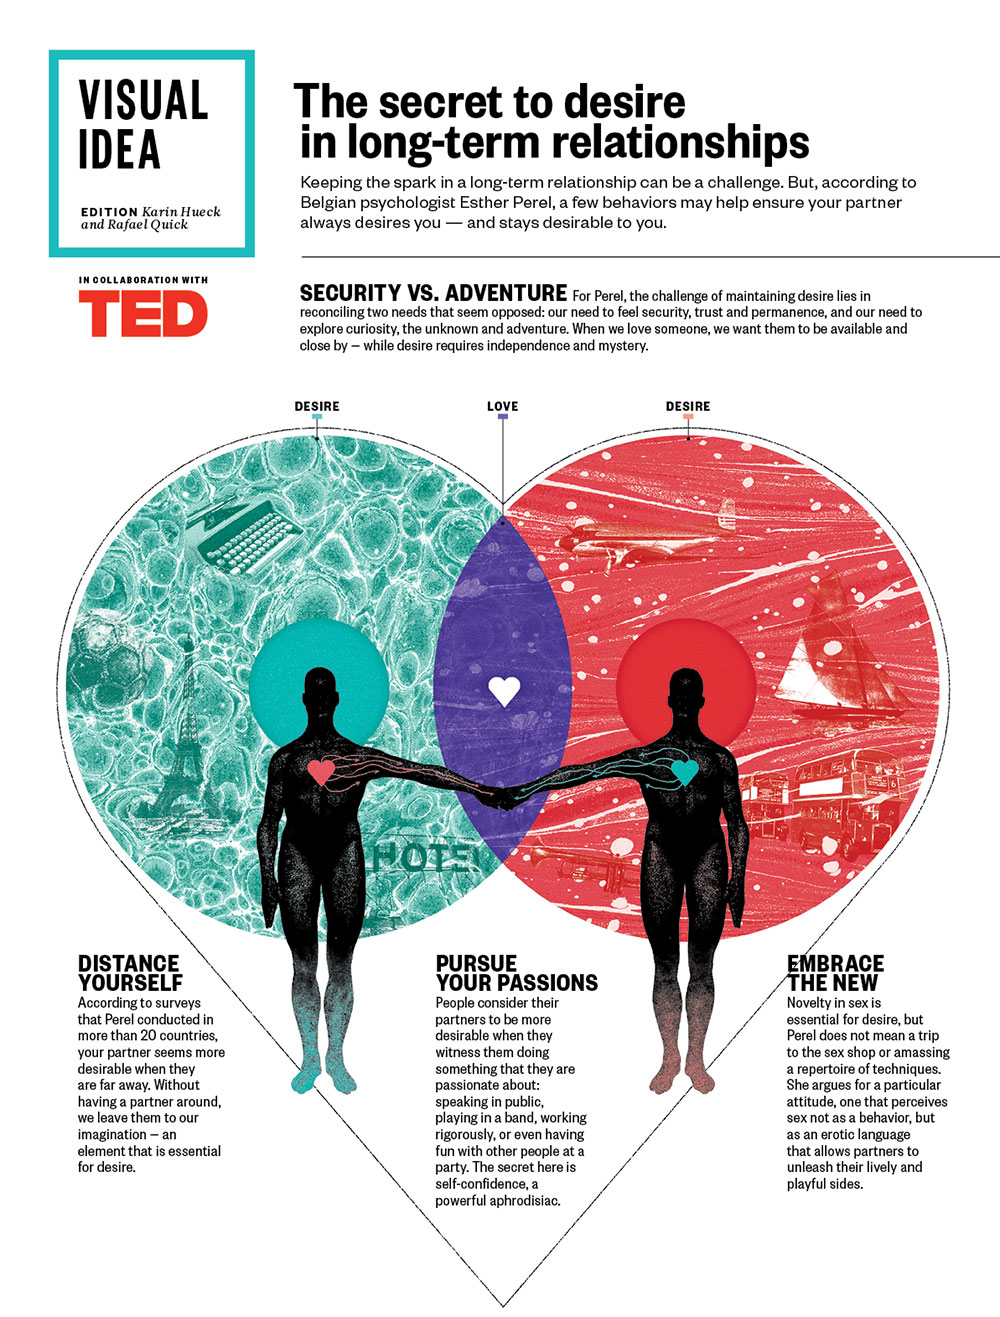 How do happily married couples keep it sexy? A visual idea | ideas.ted.com